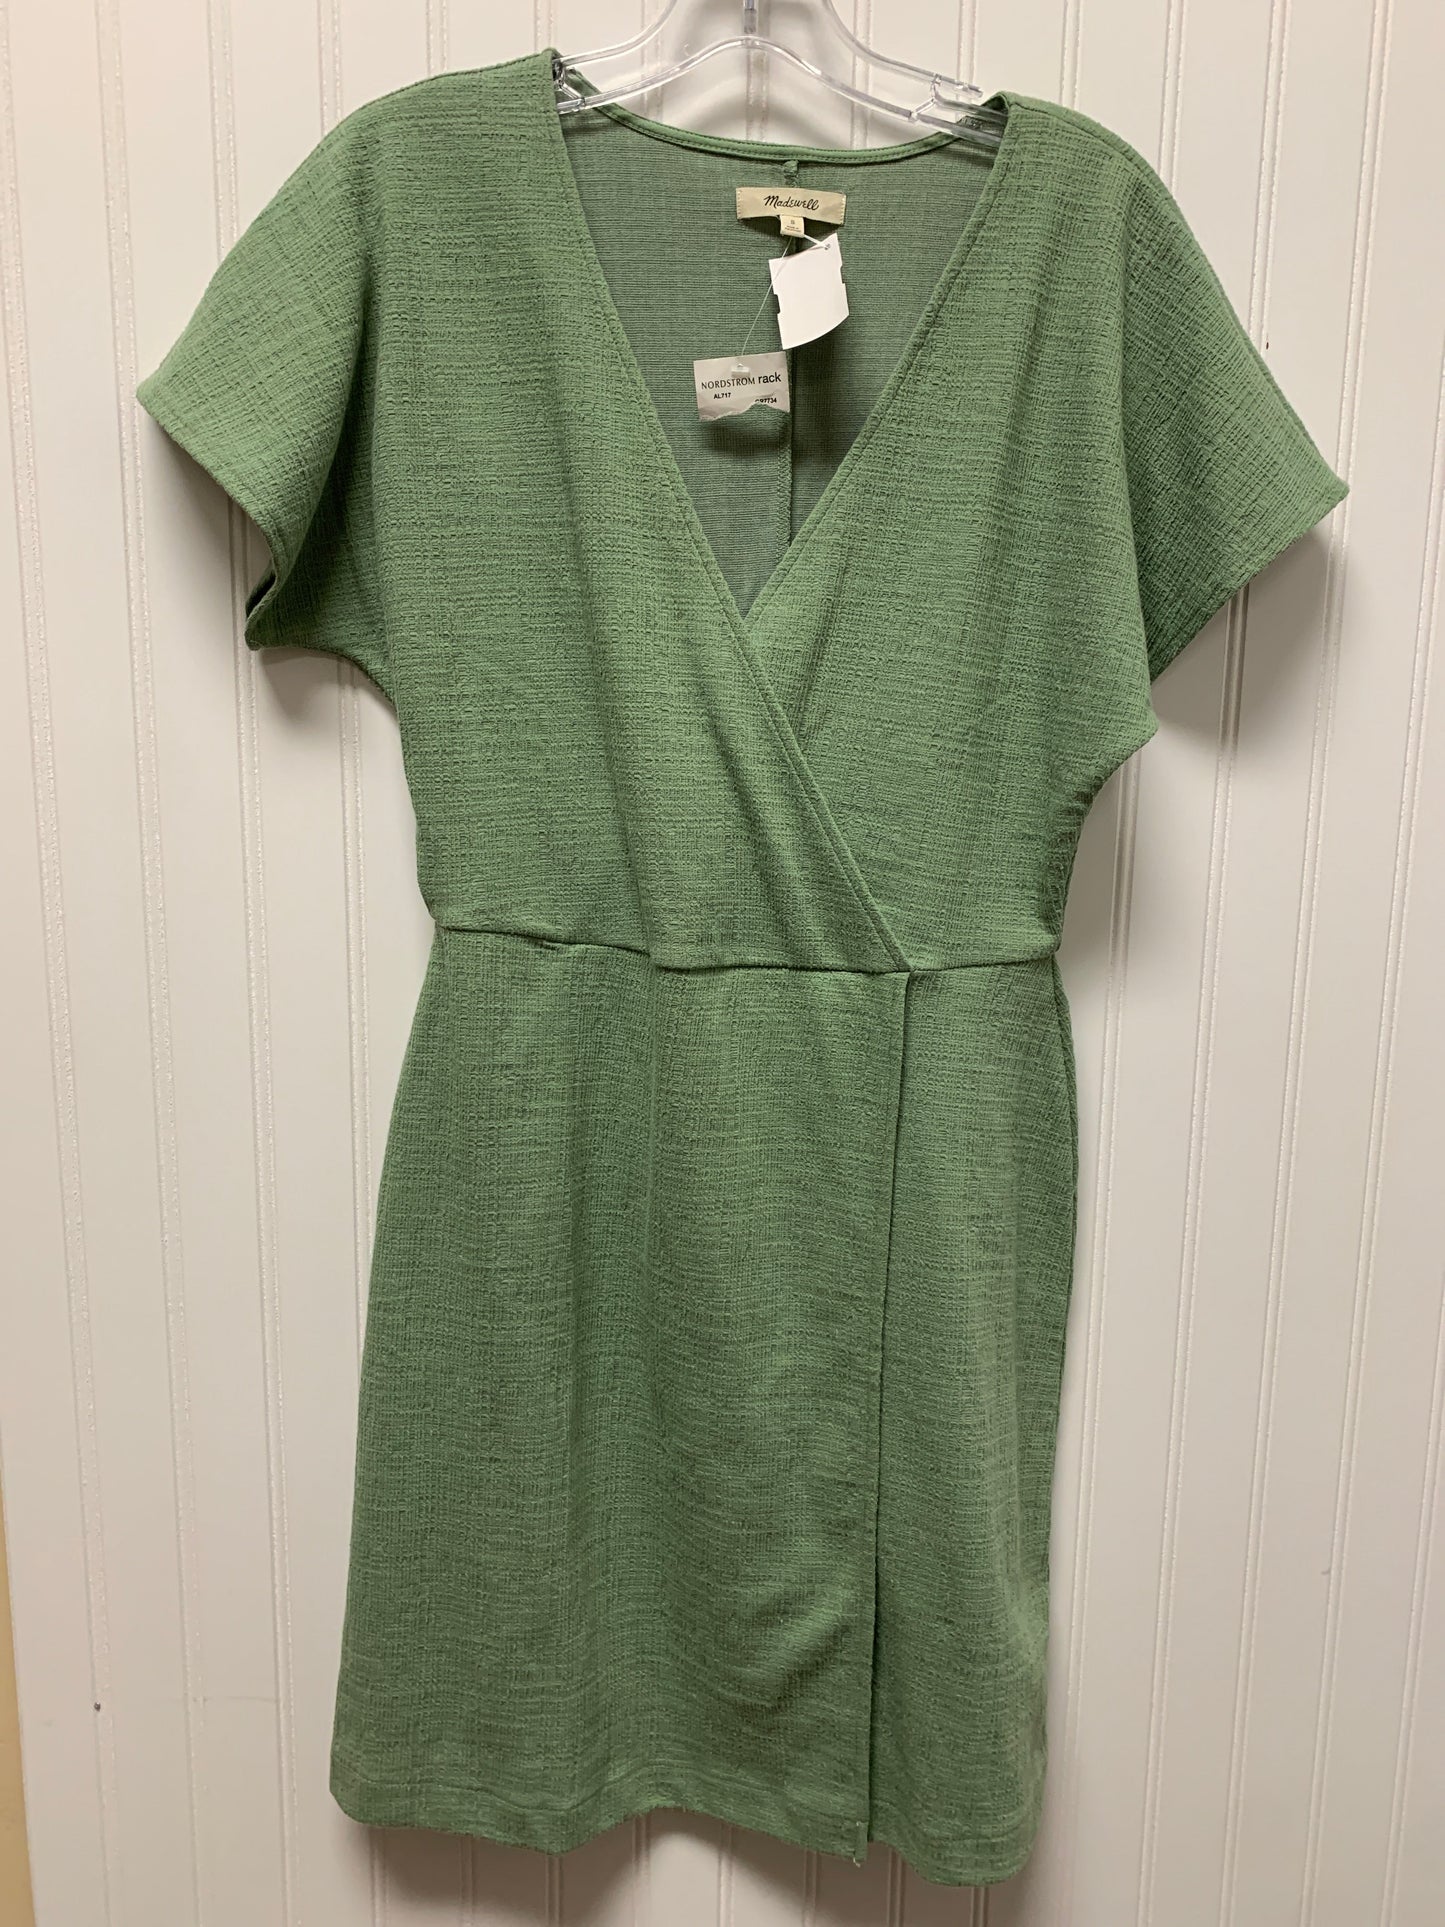 Green Dress Casual Short Madewell, Size S